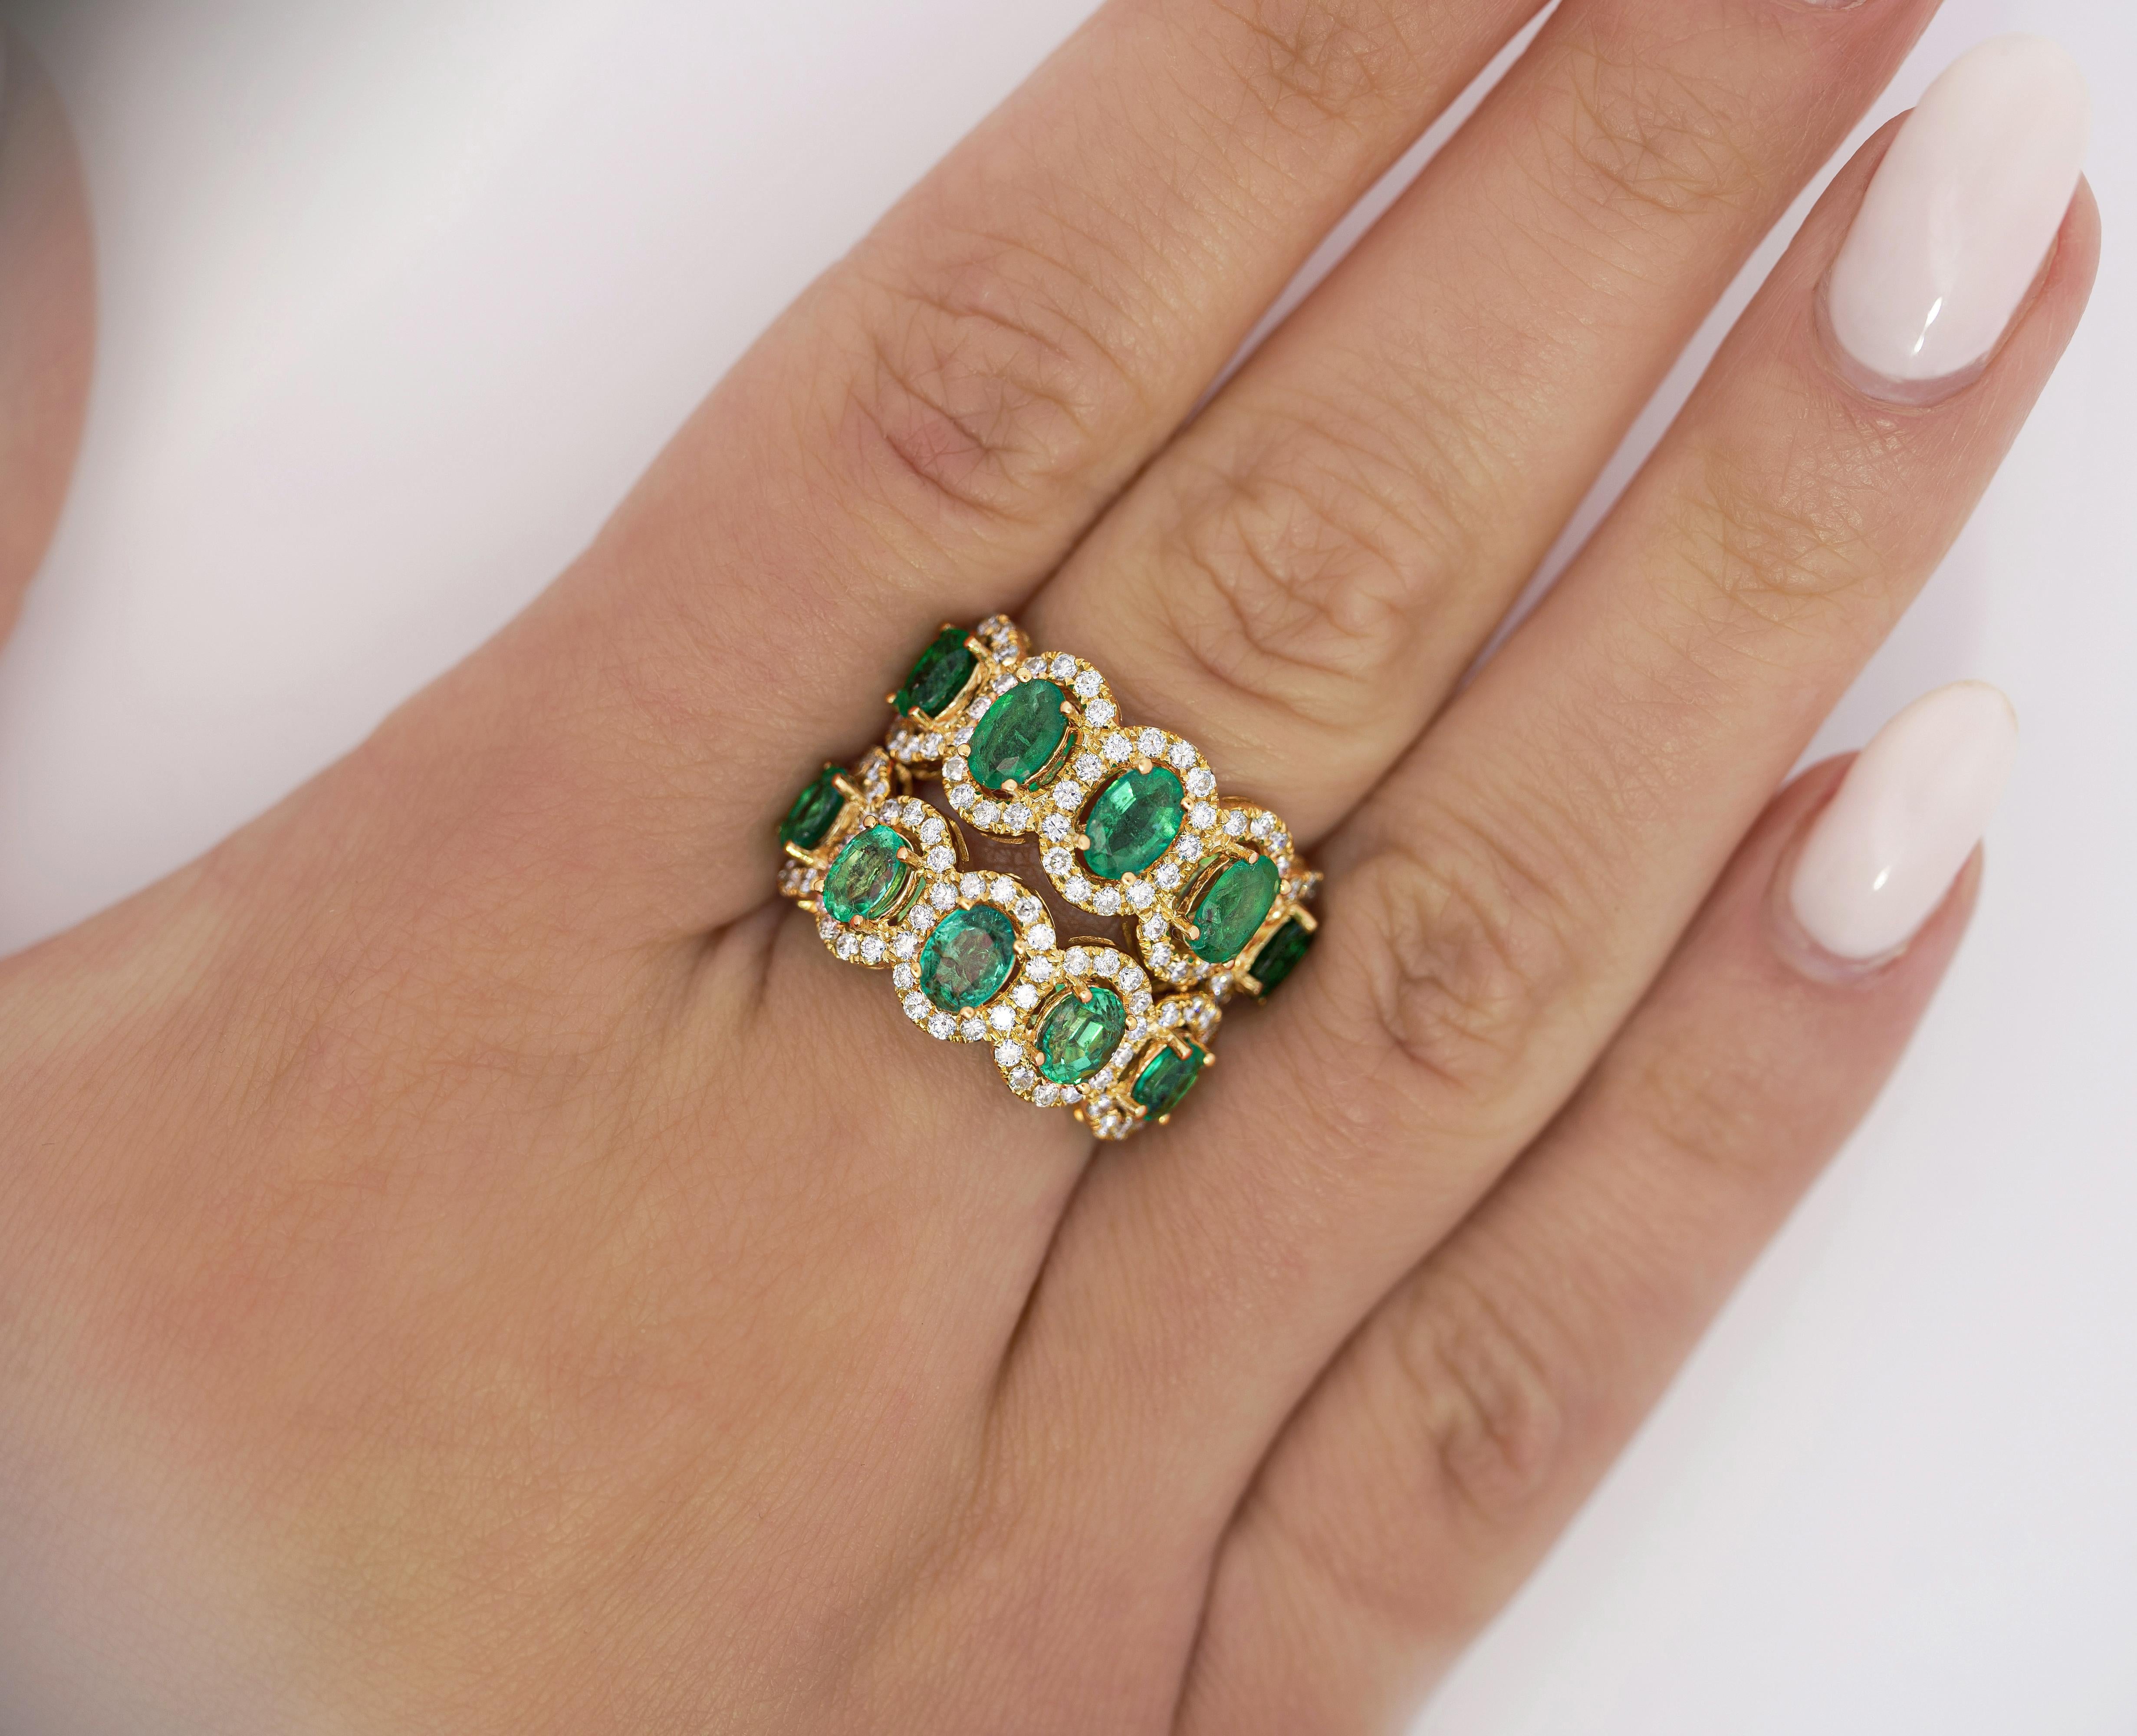 Natural Emerald and Diamond Wedding Band in 18k Solid Yellow Gold. 

This wedding band contains 5 emerald stones. Each stone is oval-cut and they carry a total weight of 1.53 carats. Each emerald is adorned with a round cut white diamond halo,